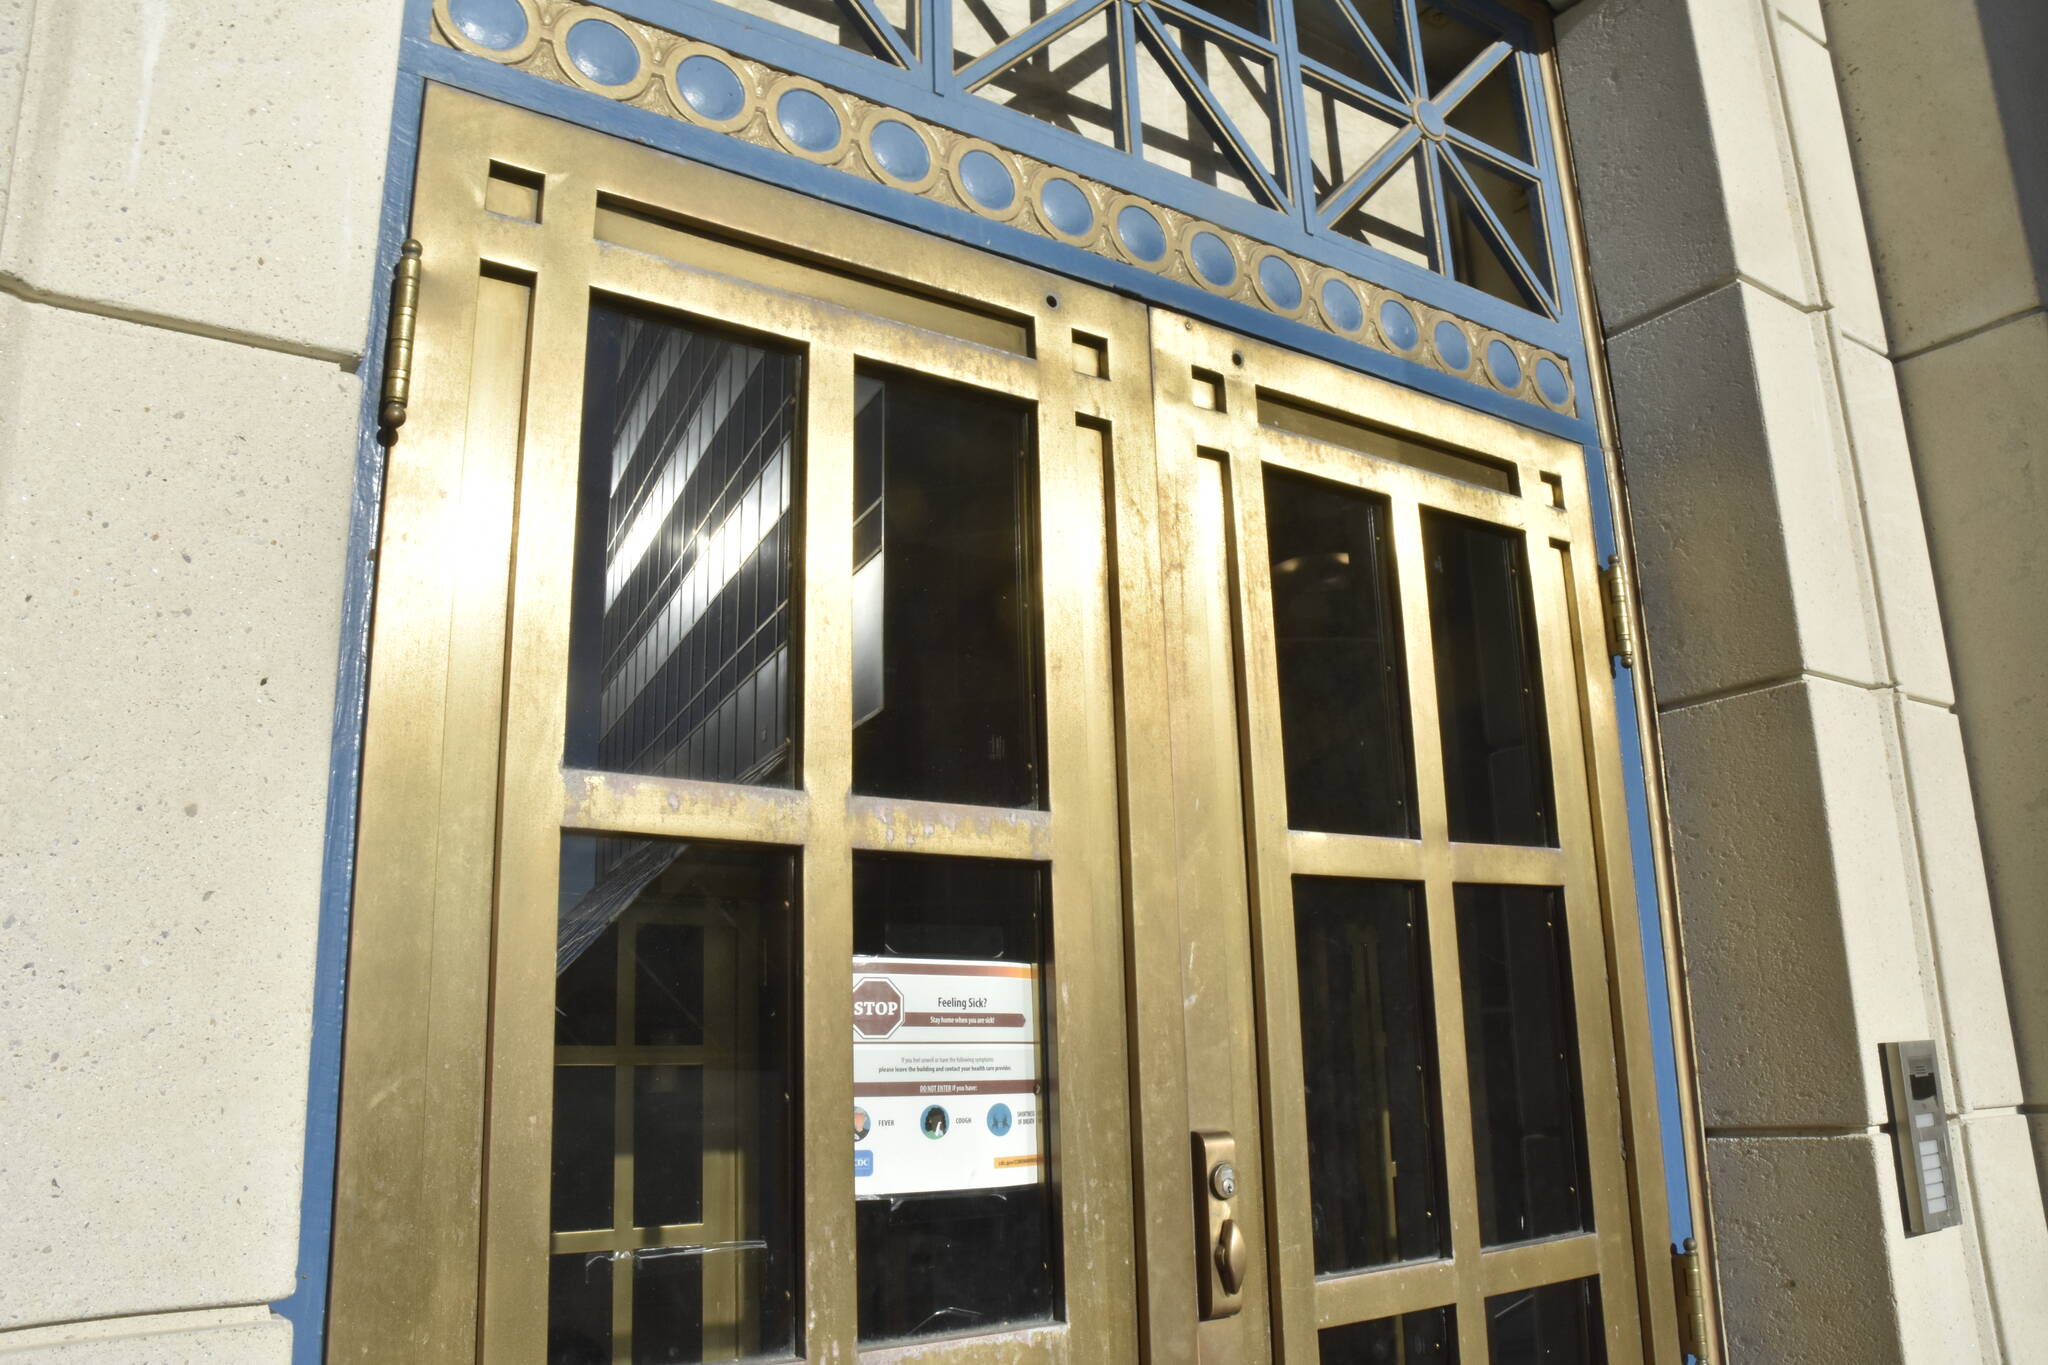 The front doors of the Alaska State Capitol was missing the sign notifying visitors of the building's masking requirement on Wednesday, Feb. 23, 2022, after an early morning by lawmakers changed the rule. Masking rules have been in place since October 2020, much to the consternation of some lawmakers. (Peter Segall / Juneau Empire)